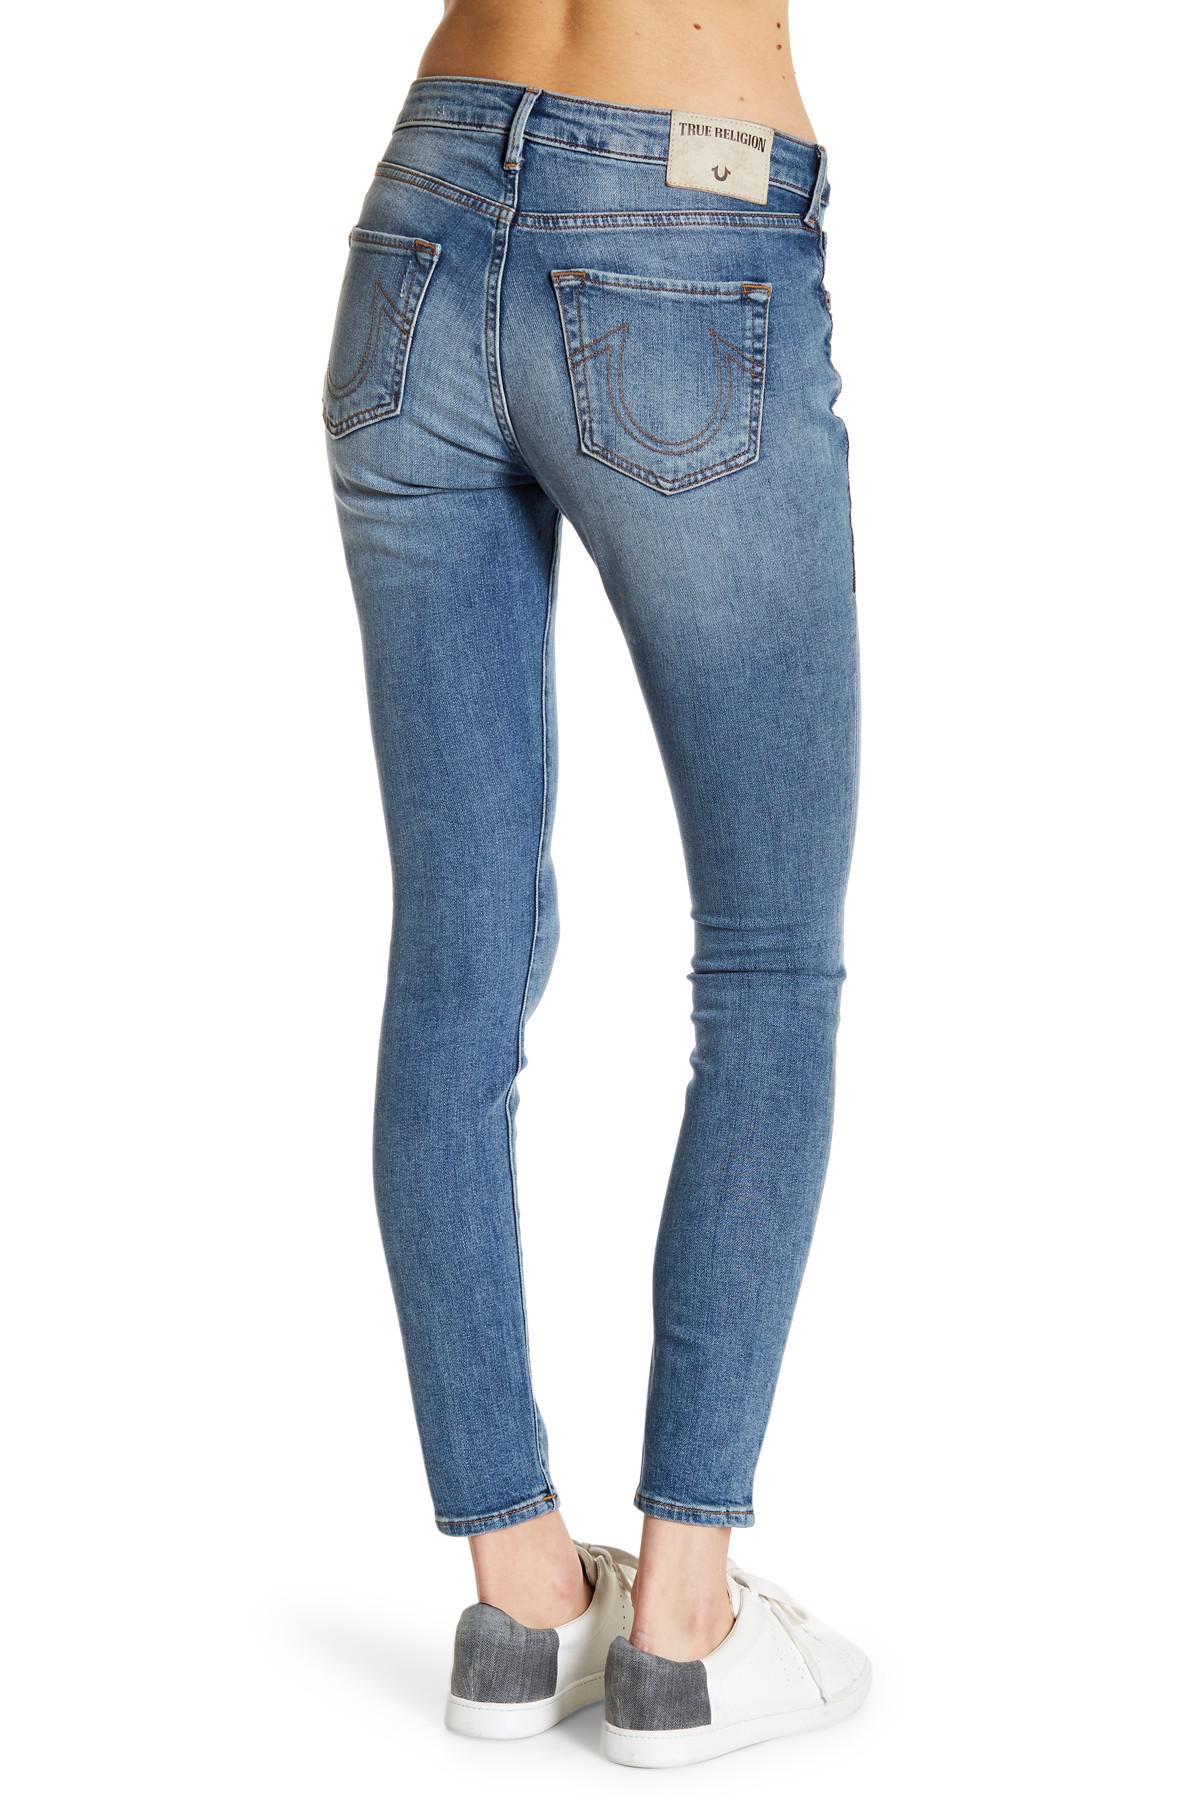 Lyst - True Religion Jennie Curvy Exposed Button Fly Jeans in Blue